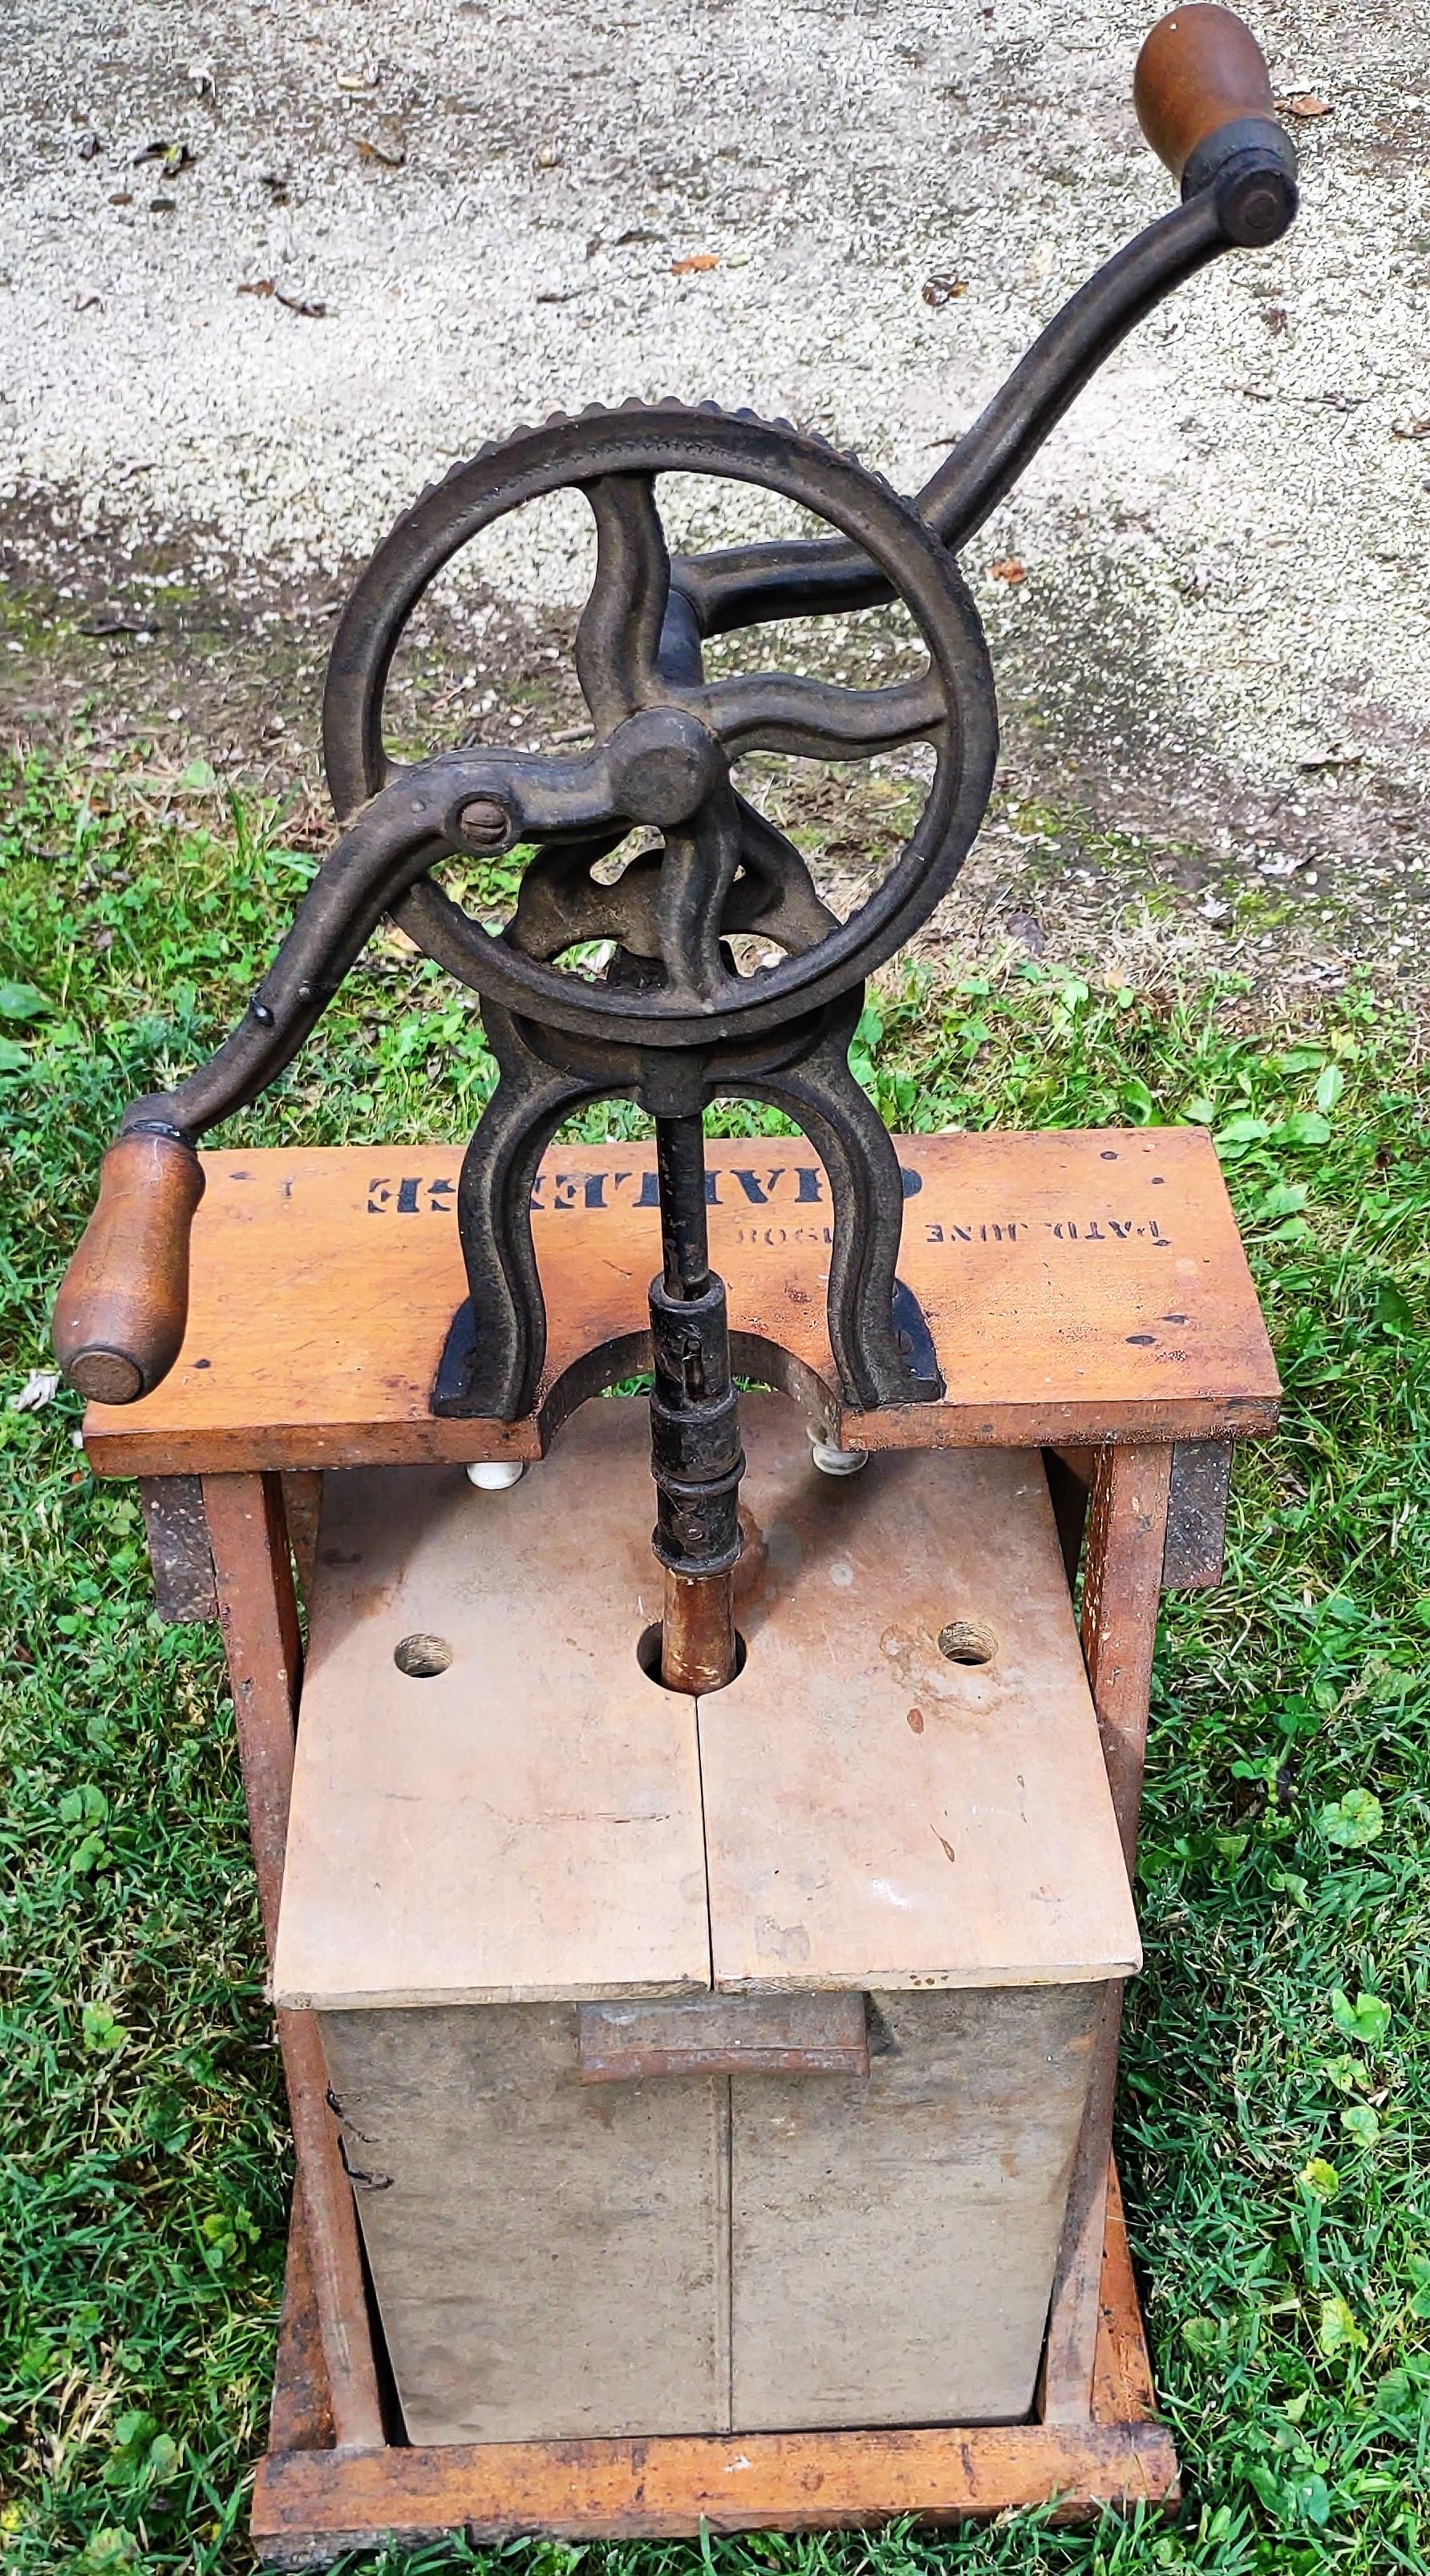 THE MASON MFG CO. 1800's NO. 2 "CHALLENGE" BUTTER CHURN - PICK UP ONLY